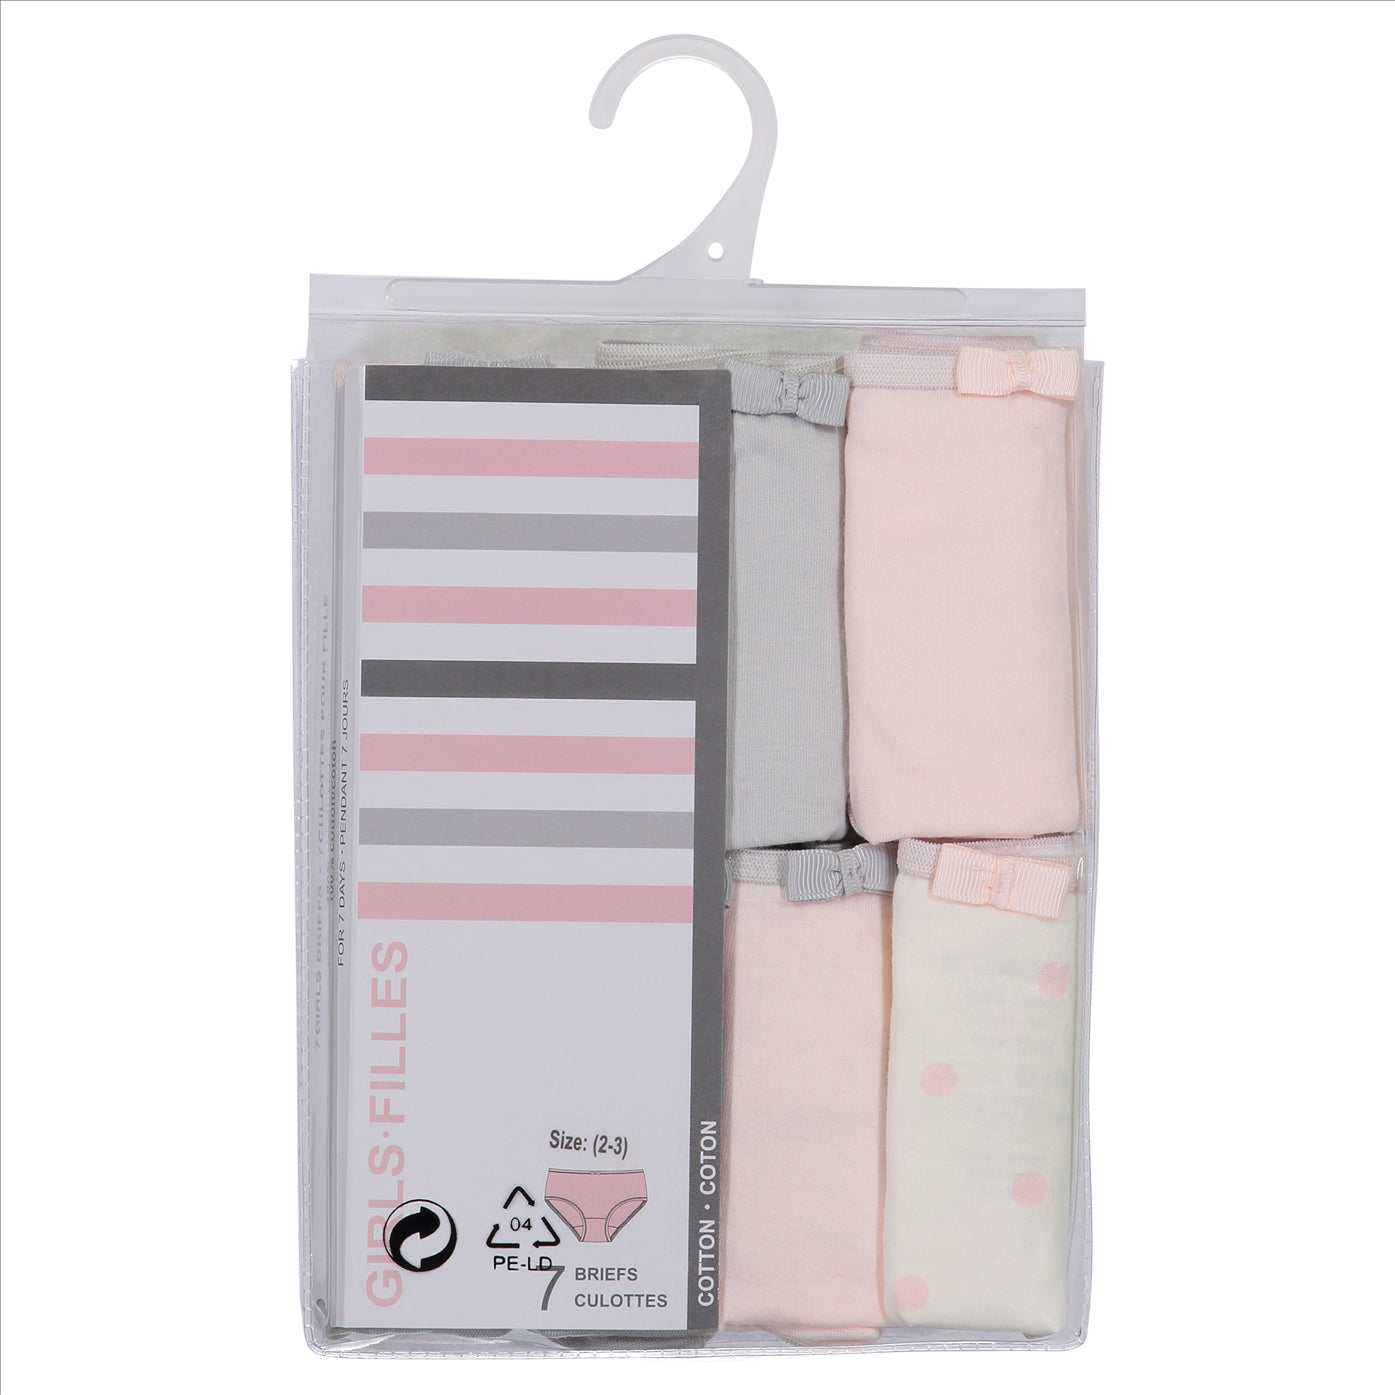 Buyless fashion girls underwear 7 day pack of assorted colors soft cot